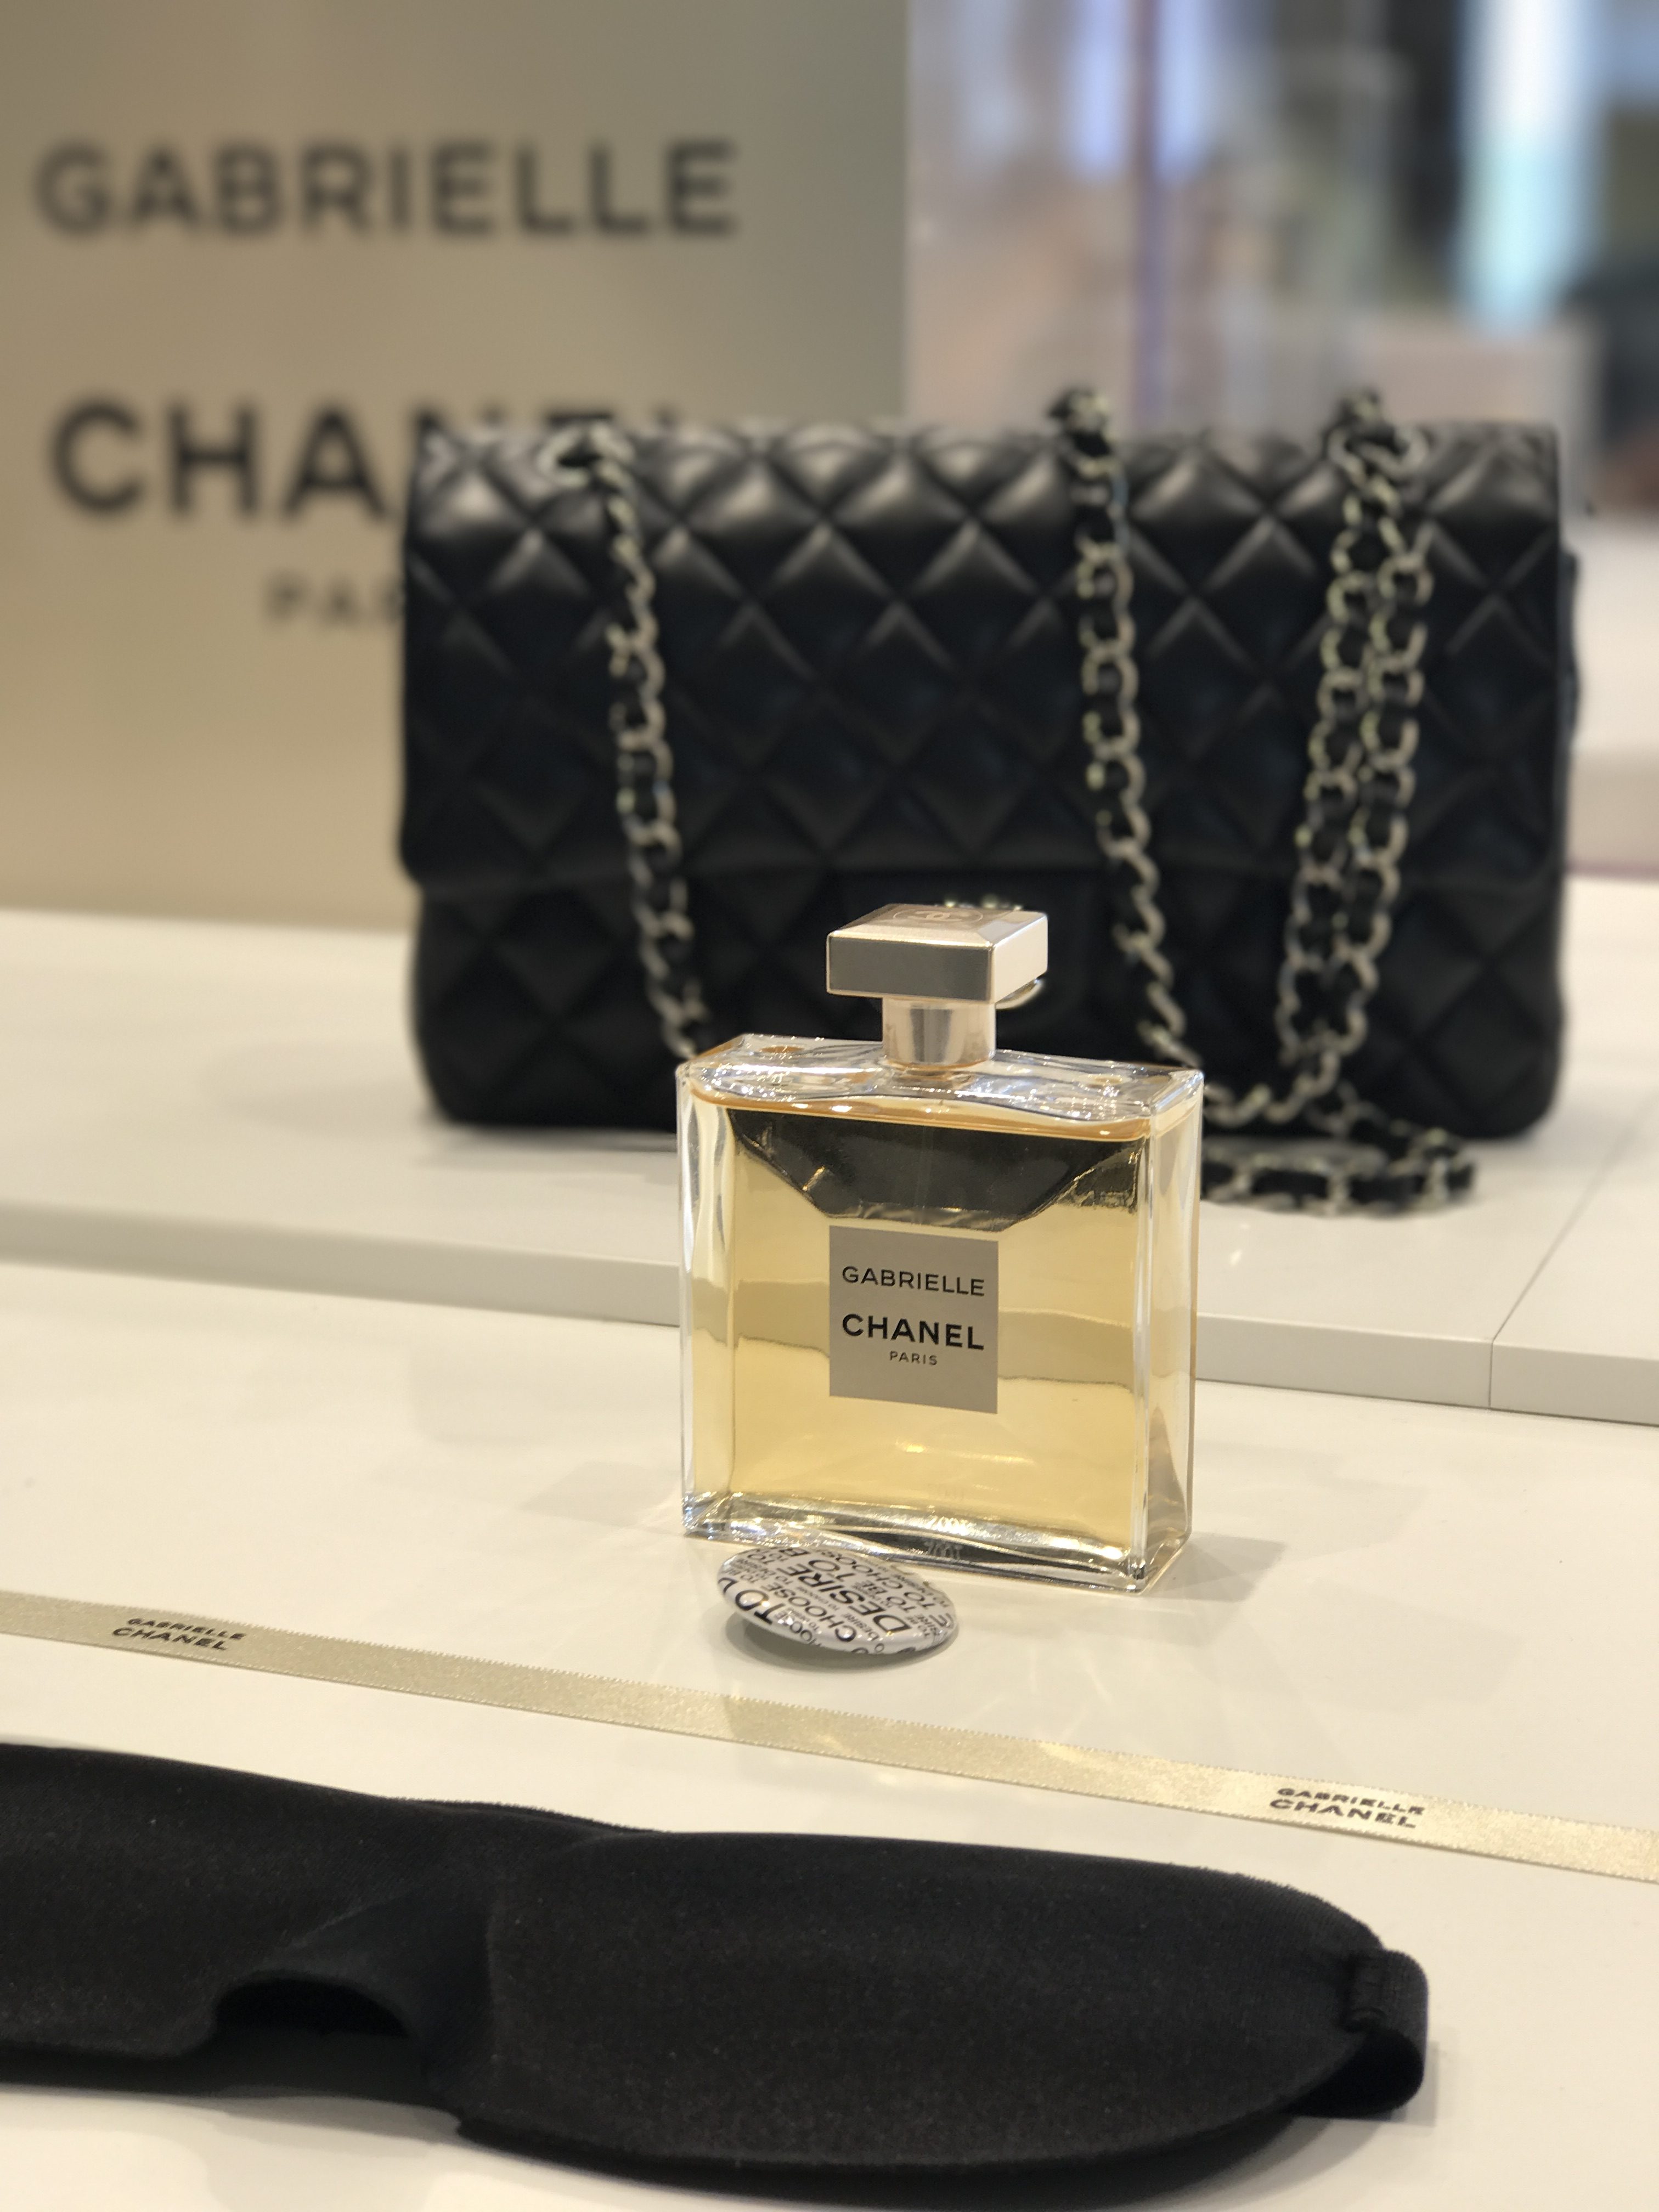 New yet timeless: the new Gabrielle Chanel scent - The Stylish Freelancer